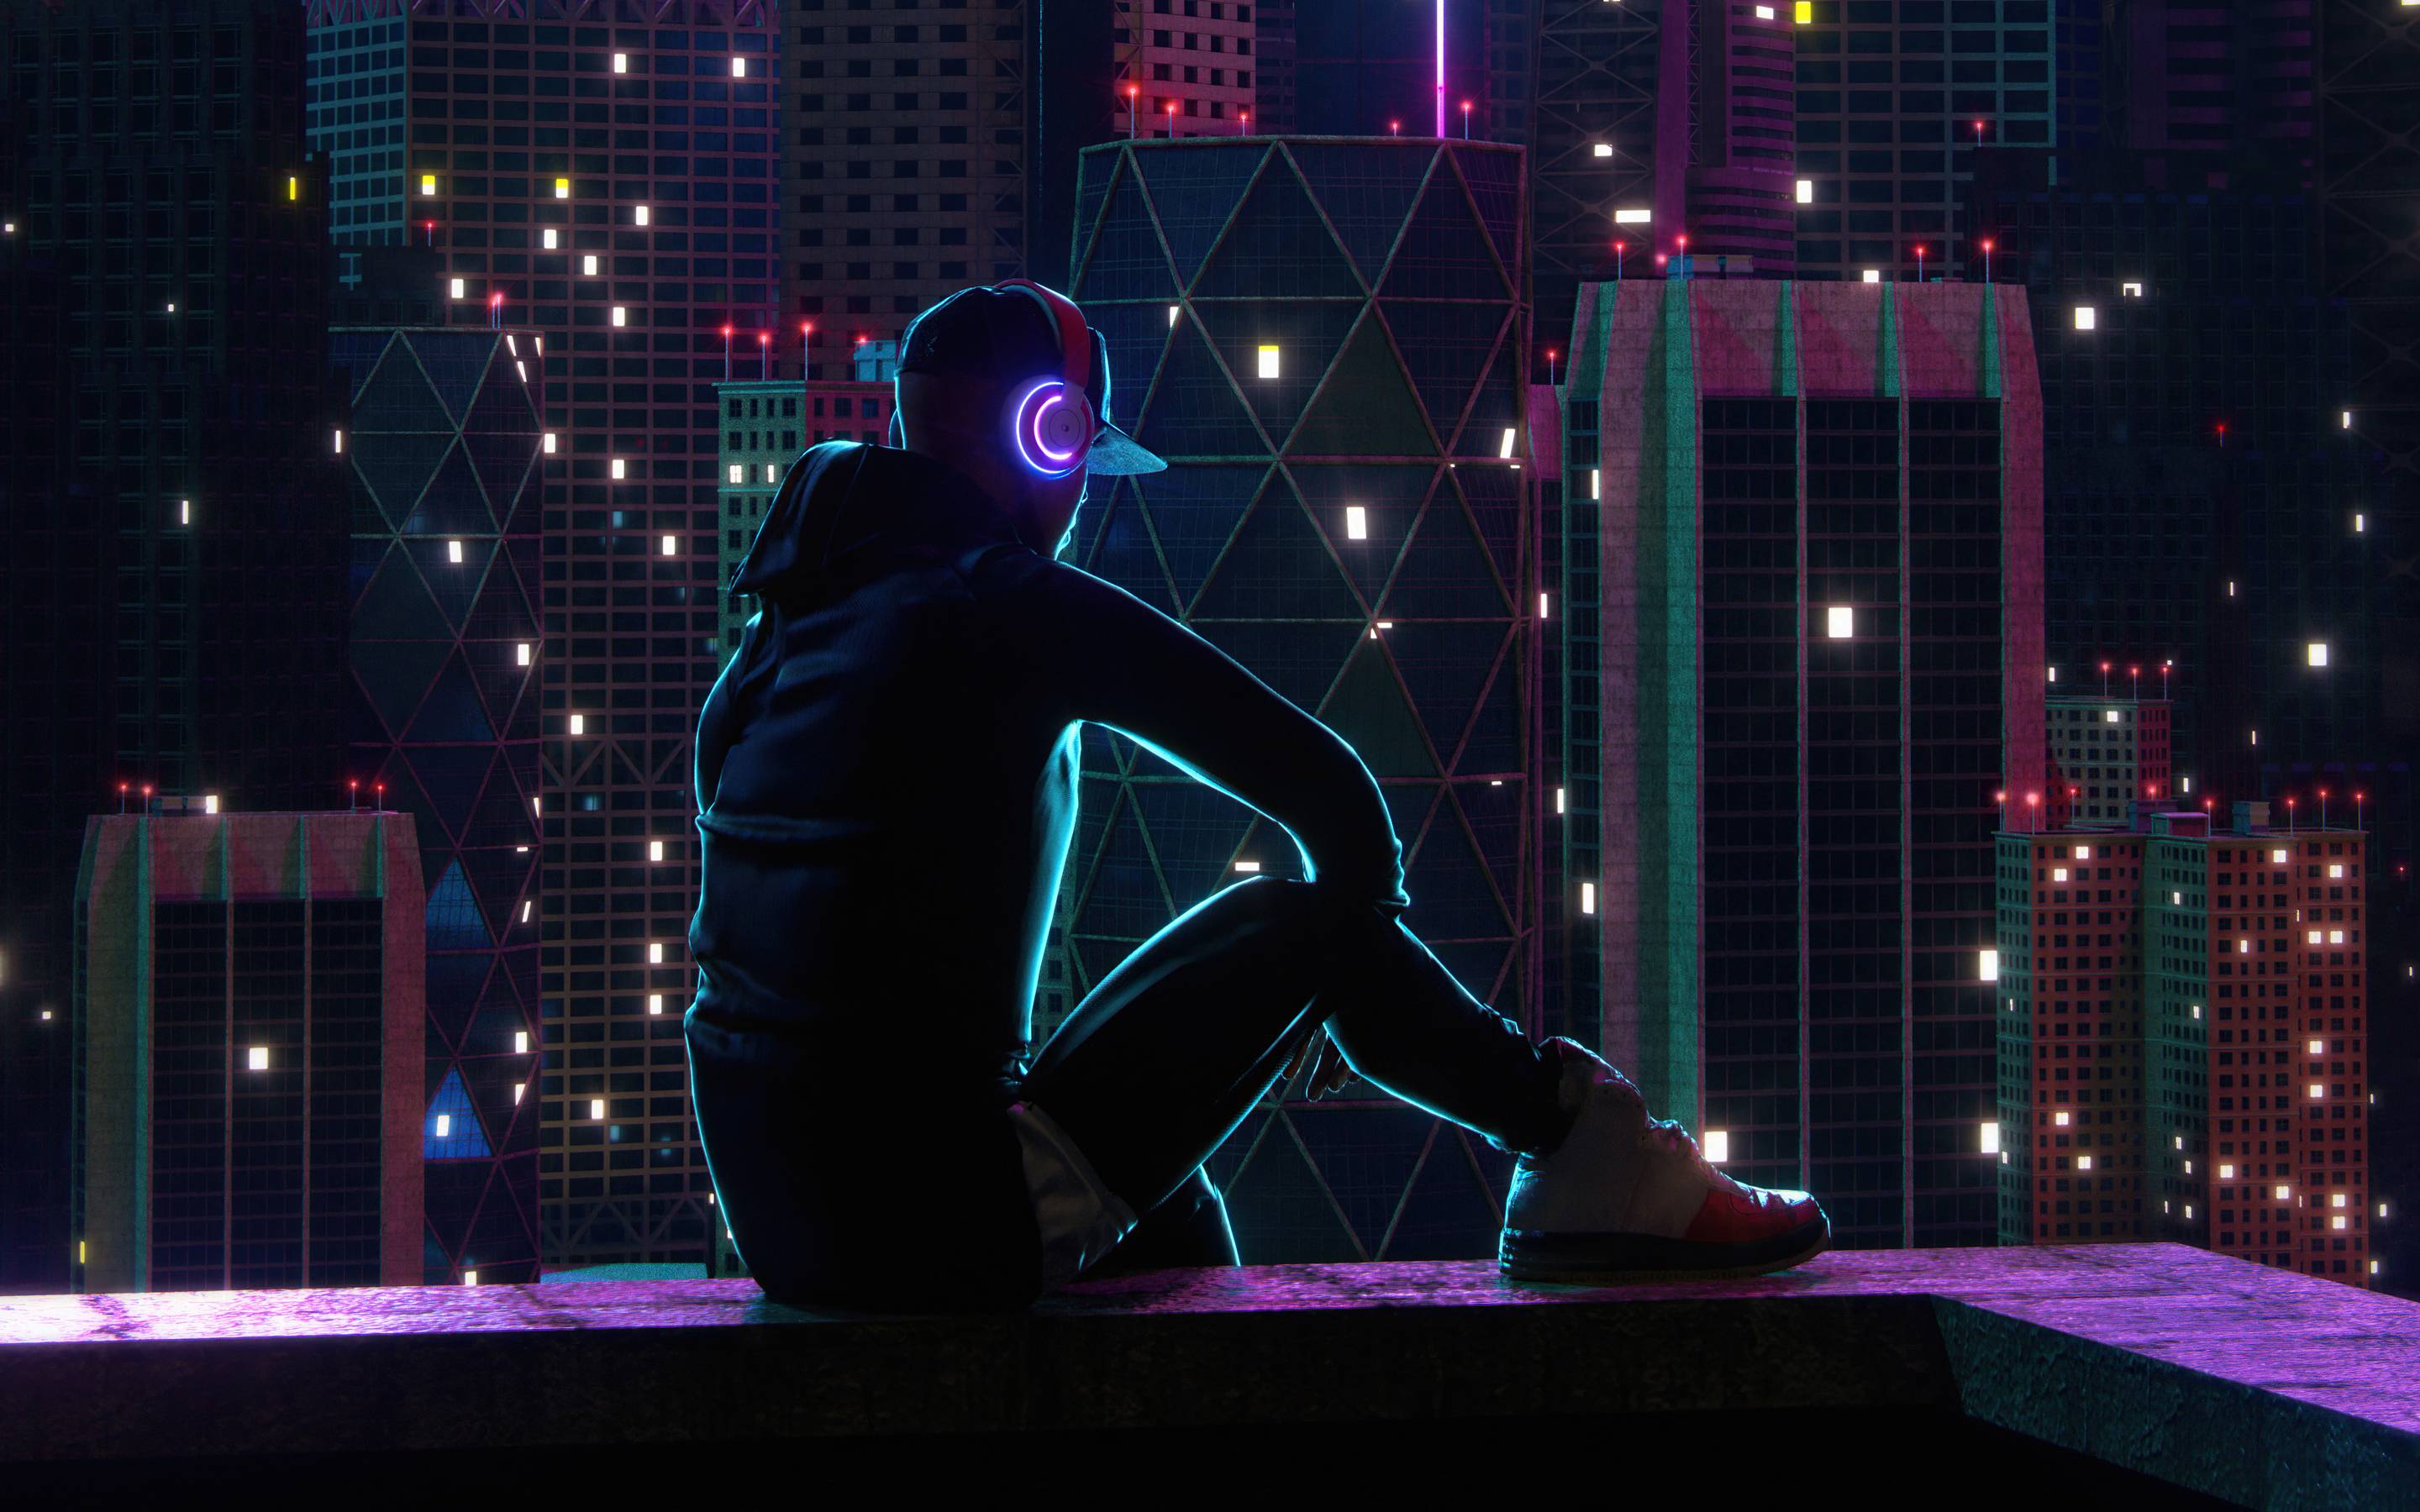 A man wearing headphones sits on a ledge in front of a cityscape - Neon